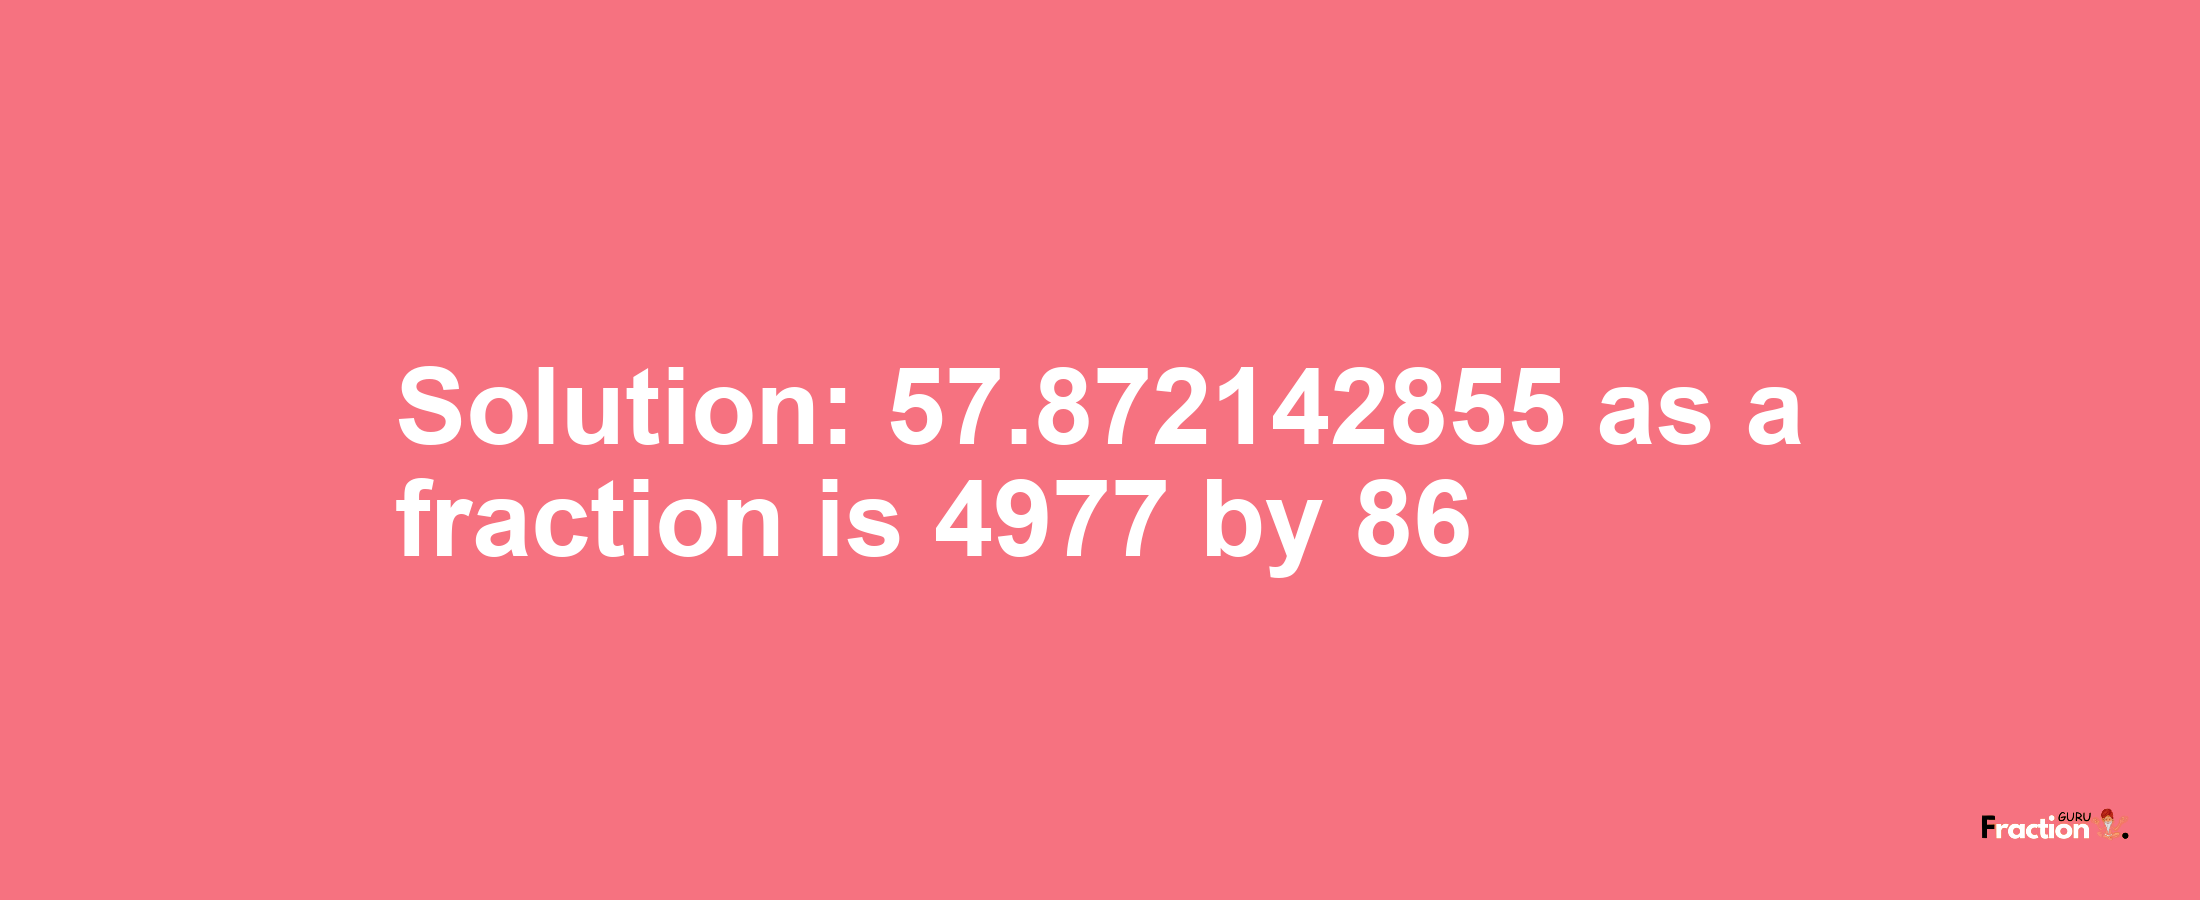 Solution:57.872142855 as a fraction is 4977/86